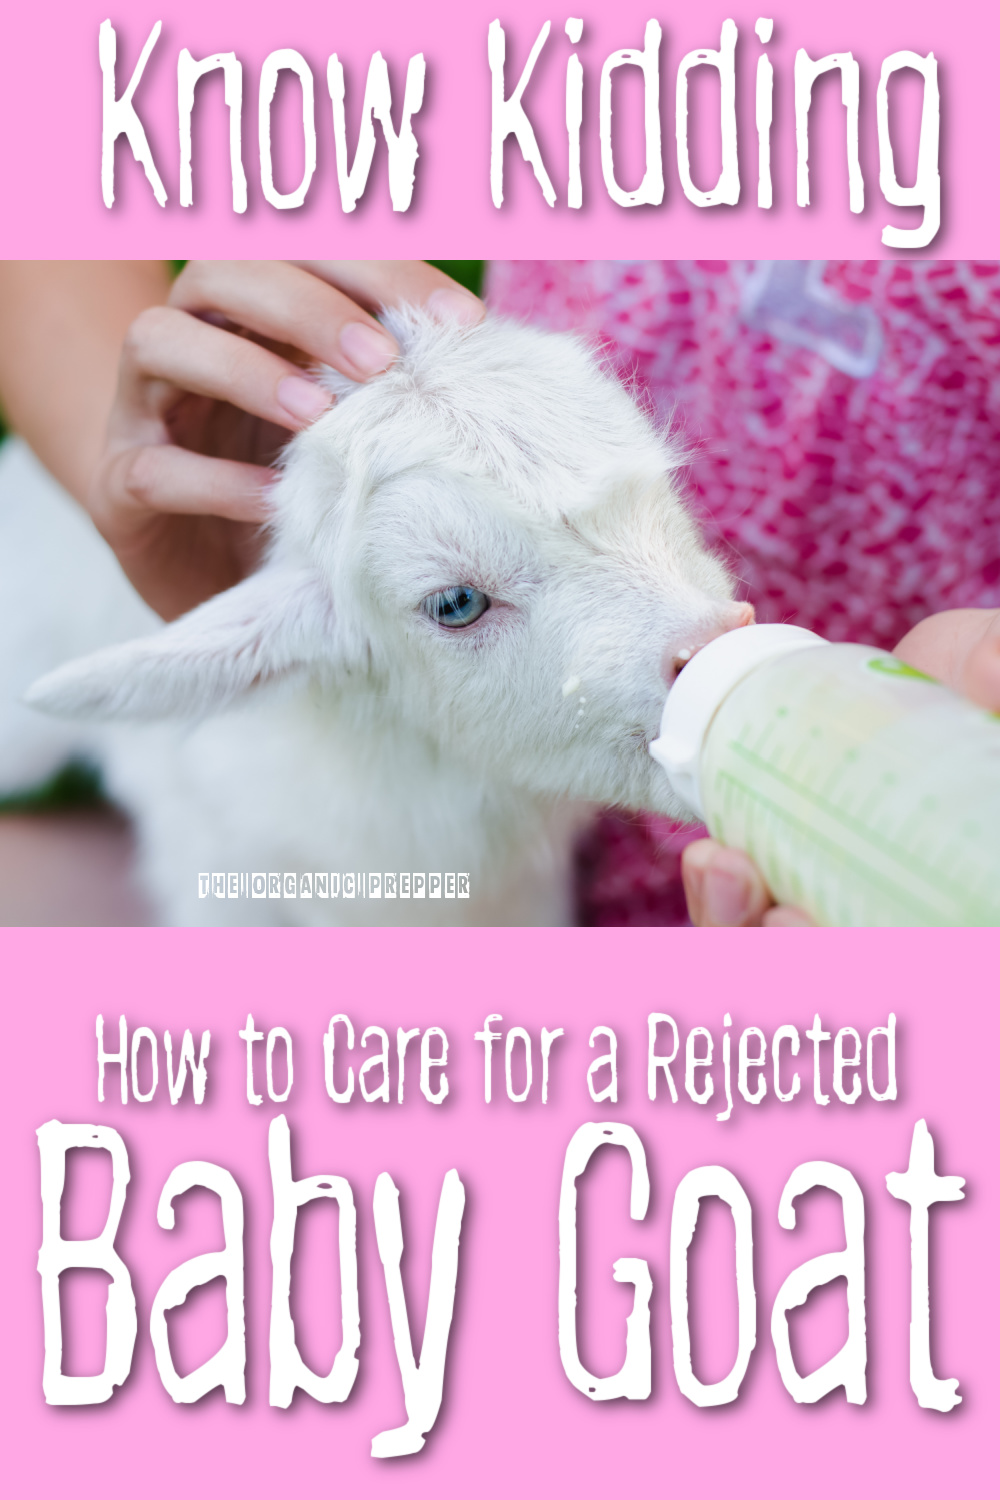 Know Kidding: How to Care for a Rejected Baby Goat